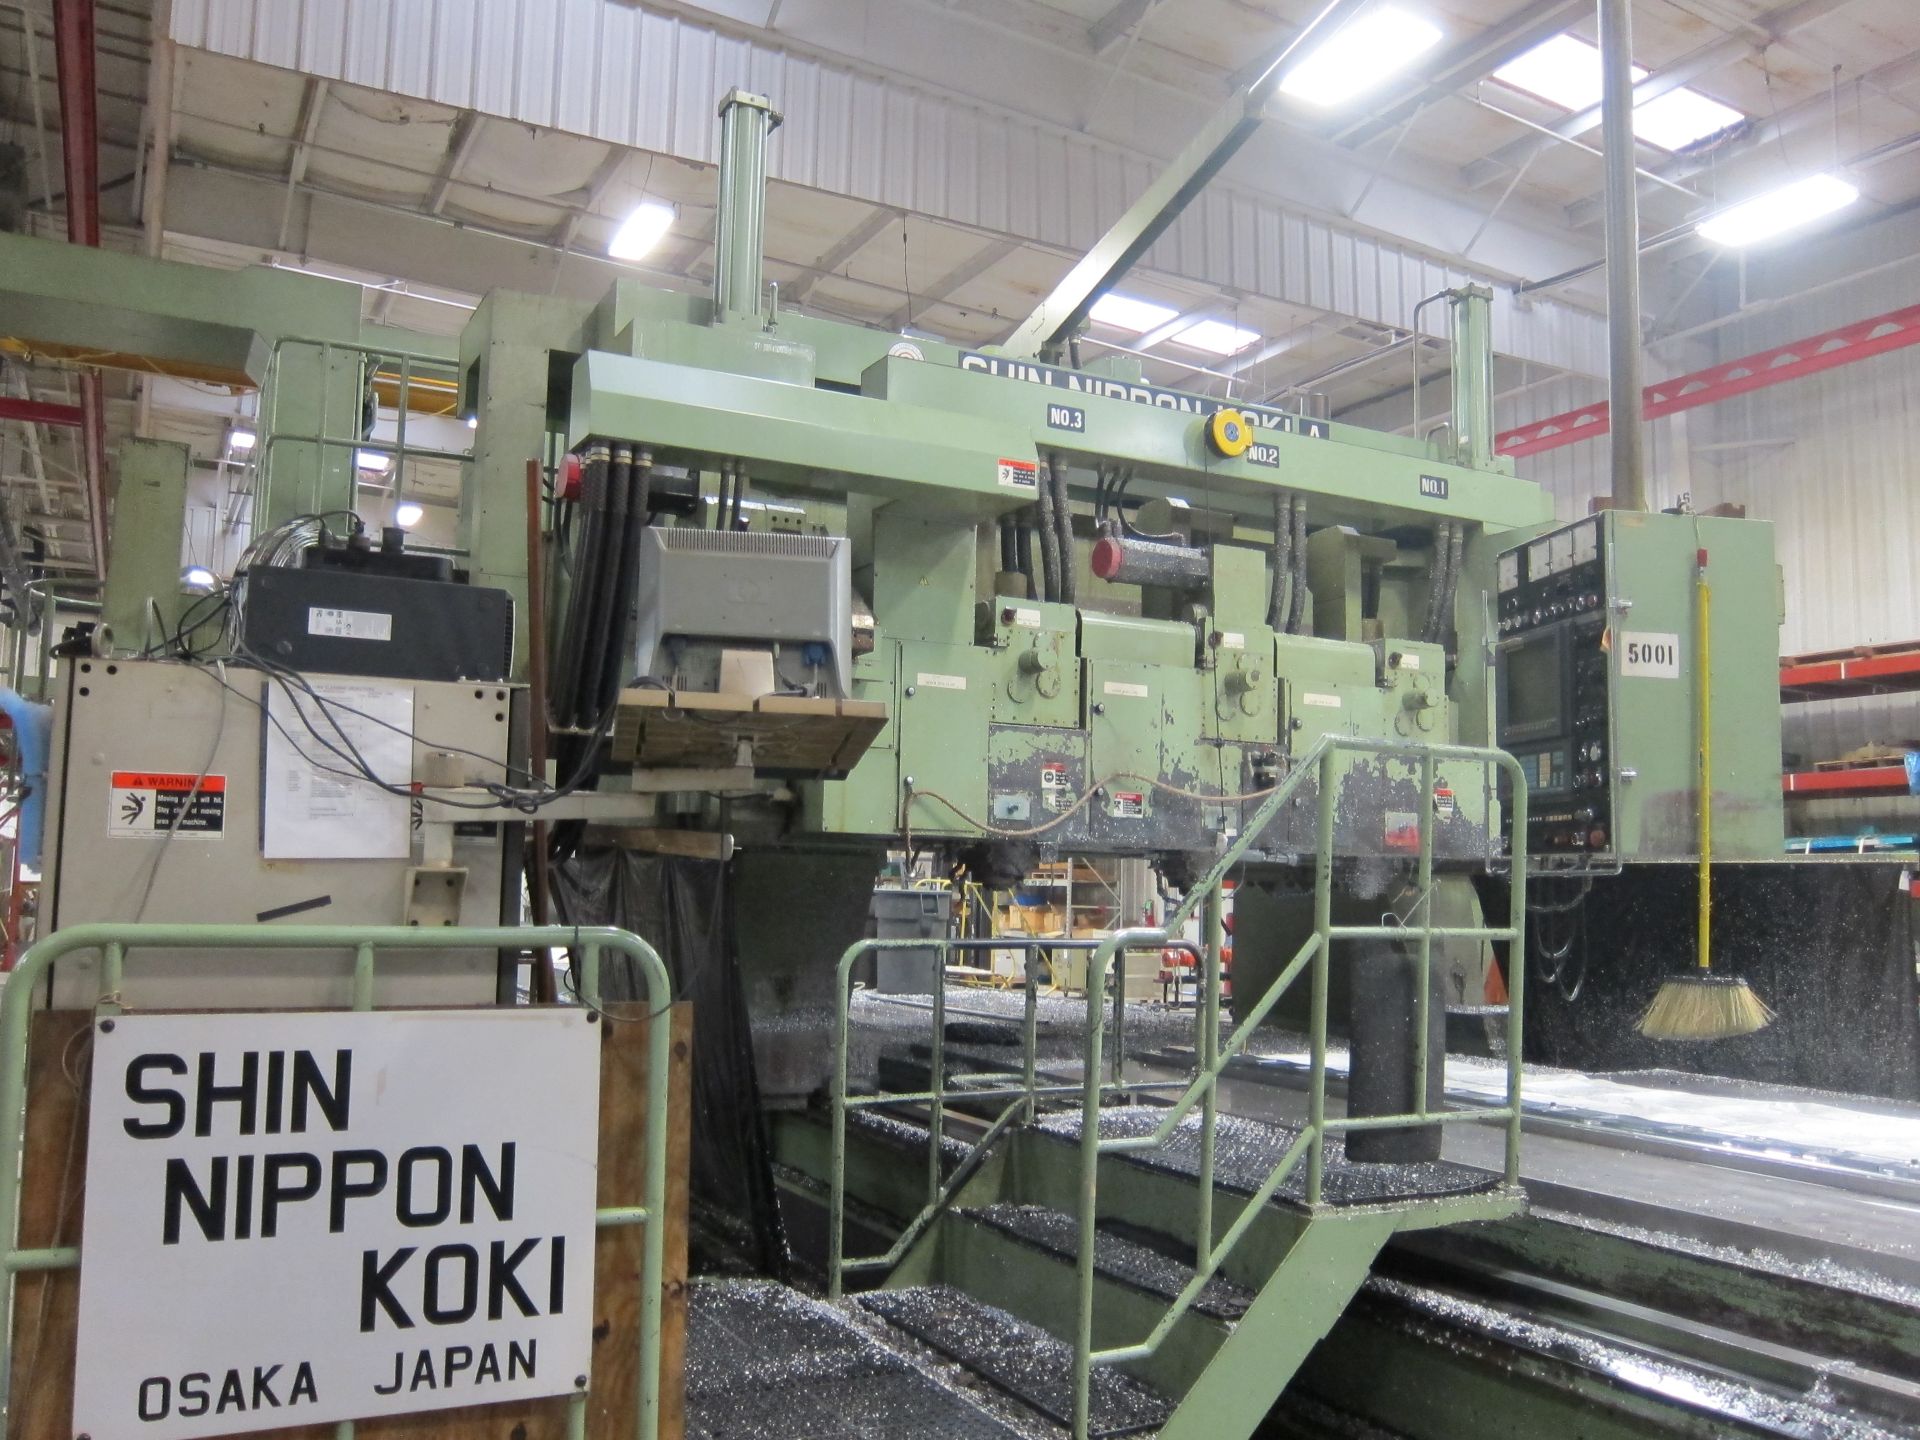 SNK PM-6 5-Axis CNC Gantry Type Profile Milling Machine - 1st Gantry Only - Image 7 of 7